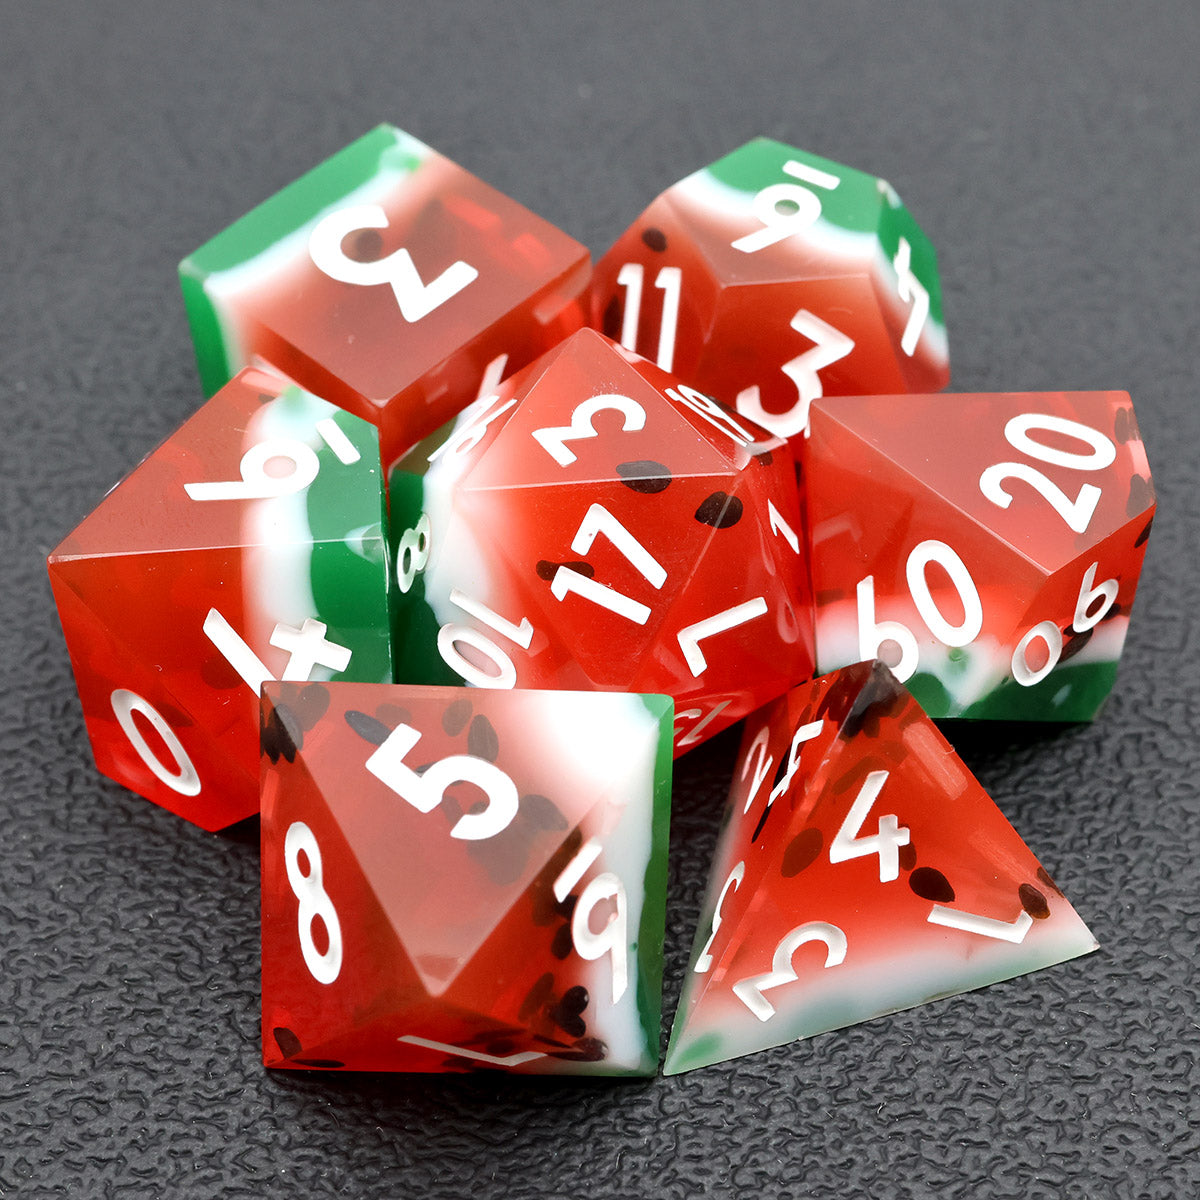 Watermelon dnd/TTRPG dice sets for dnd role playing games and dice goblin collectors from a UK dice store